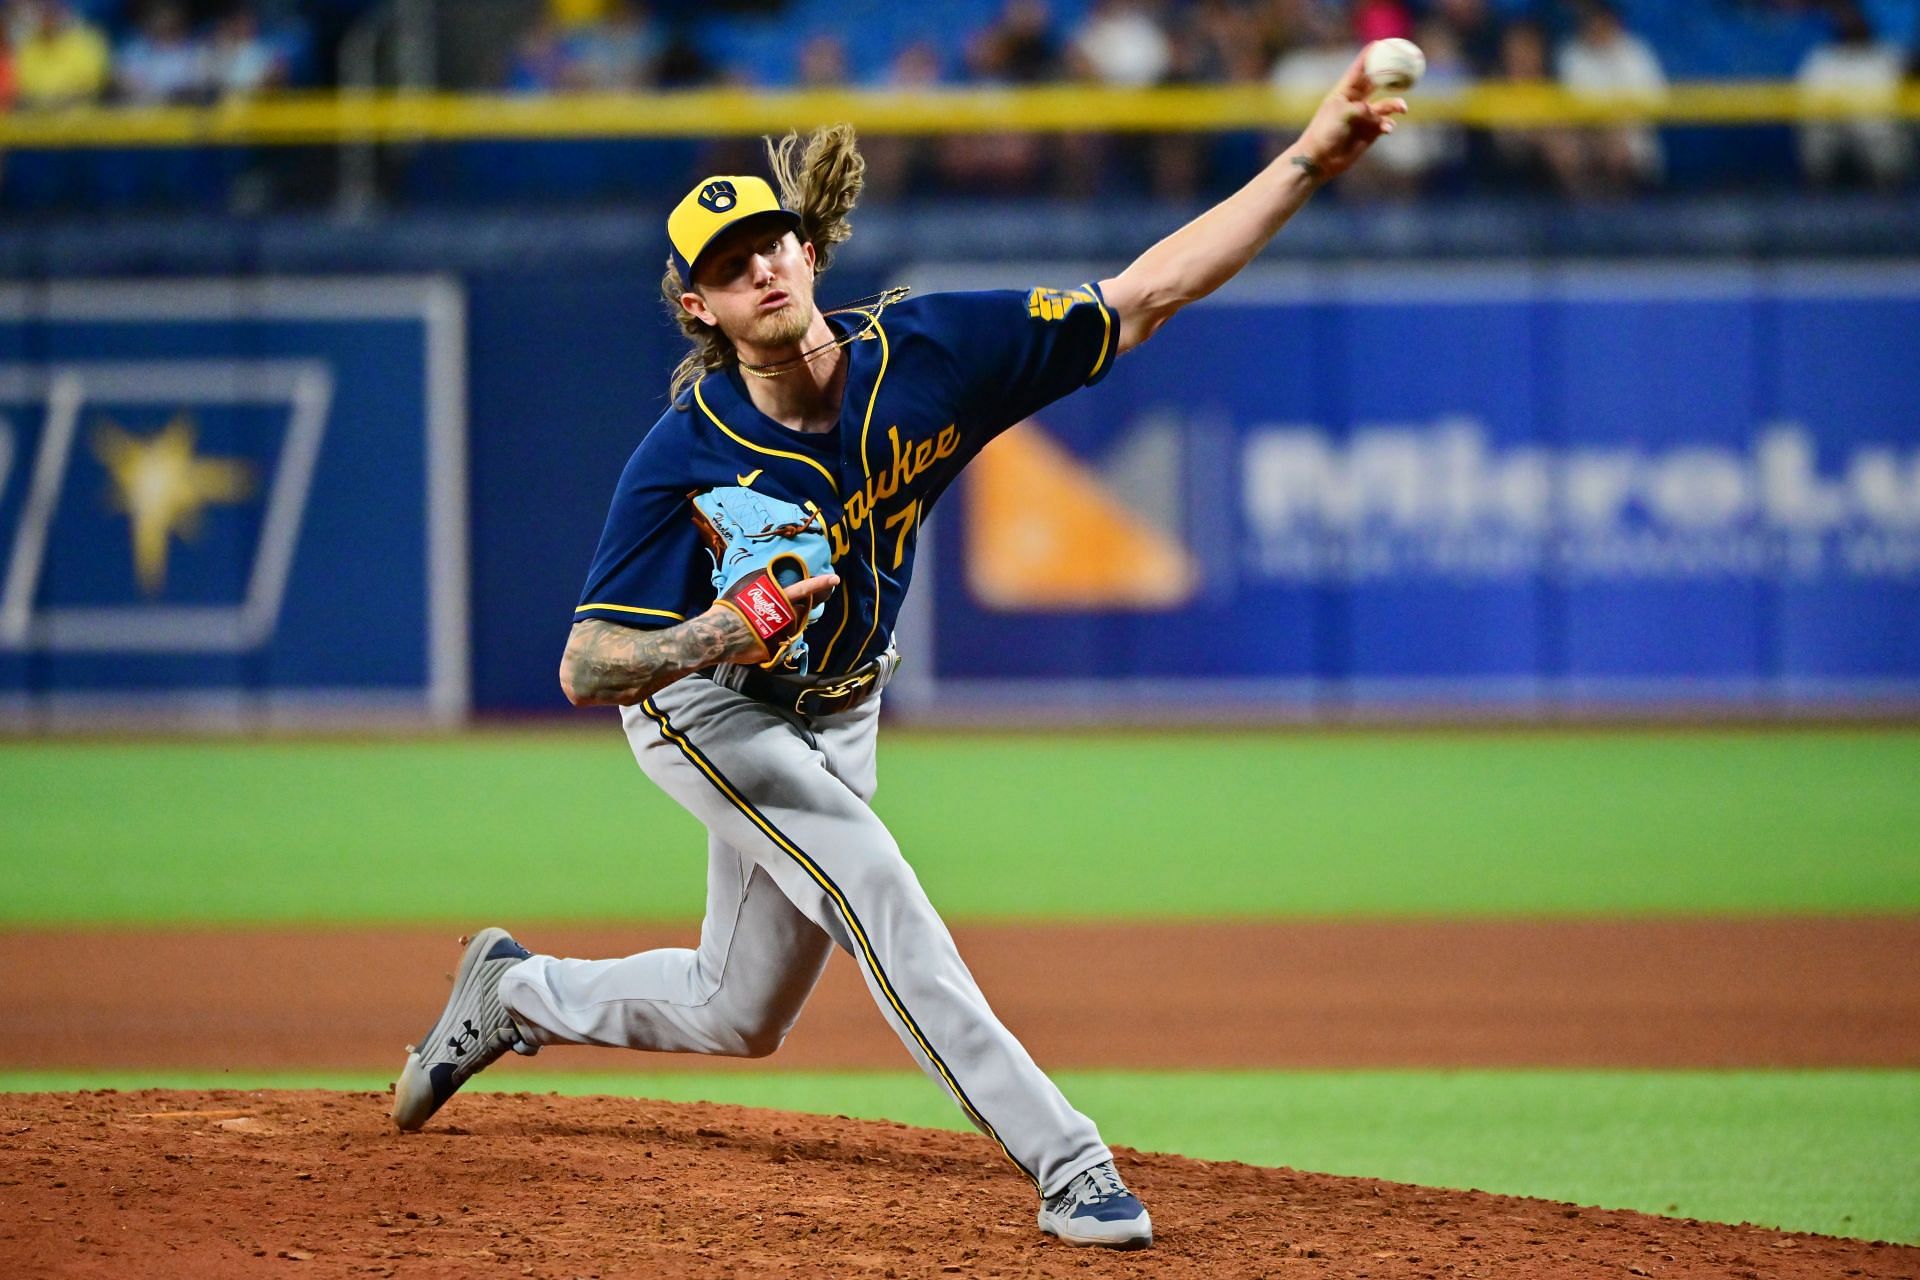 Josh Hader delivers a pitch in the ninth inning against the Tampa Bay Rays at Tropicana Field.